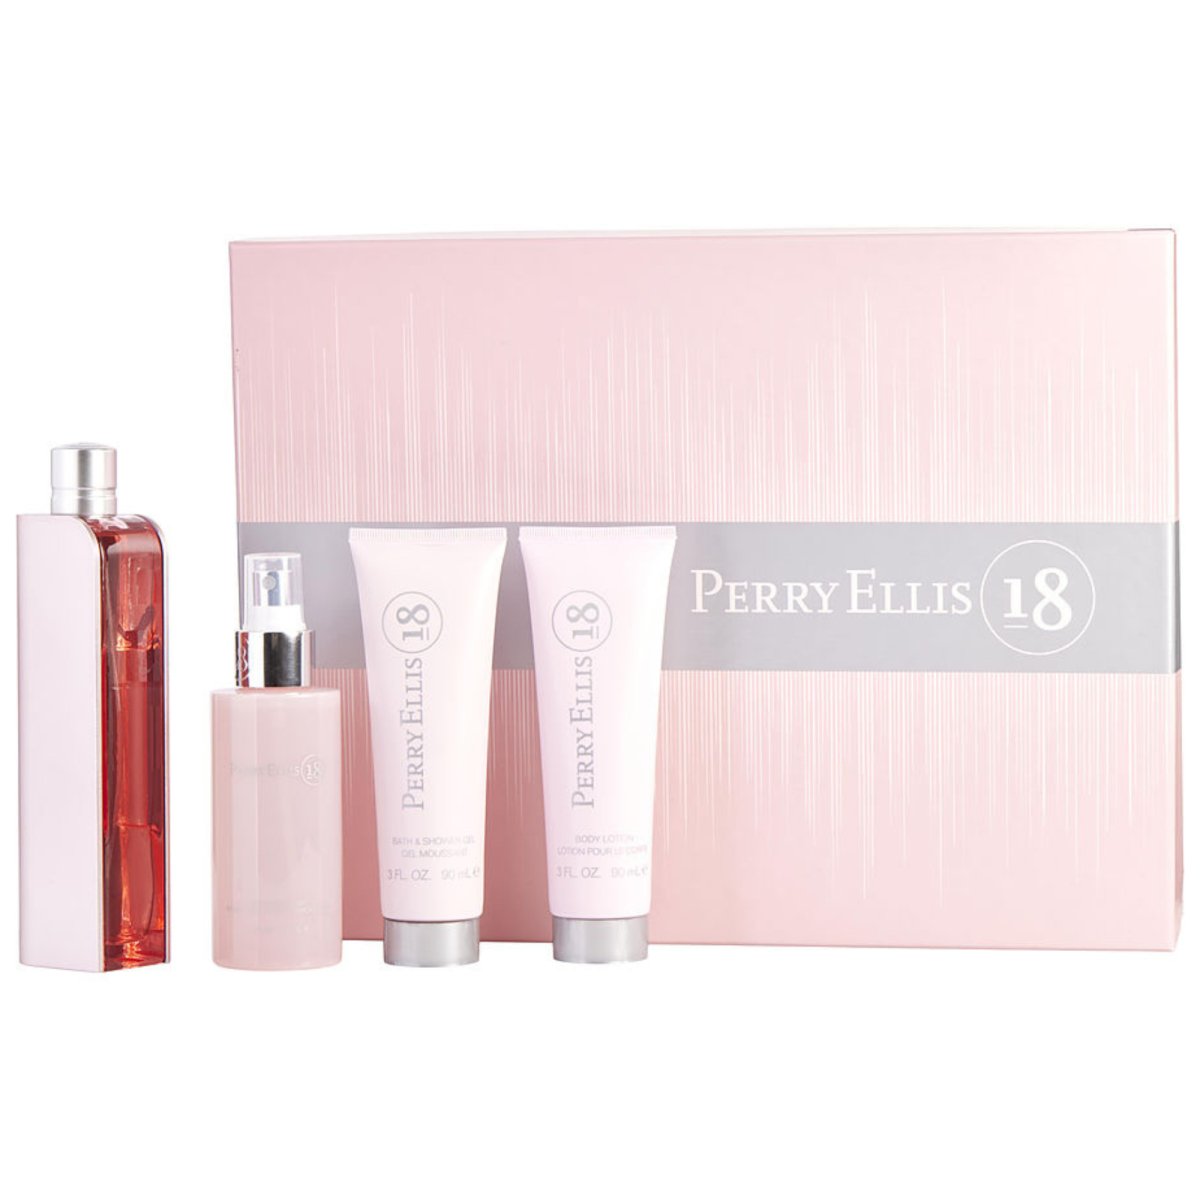 Perry Ellis 18 by Perry Ellis for Women 4Pc Gift Set - Perry Ellis - Gift Set